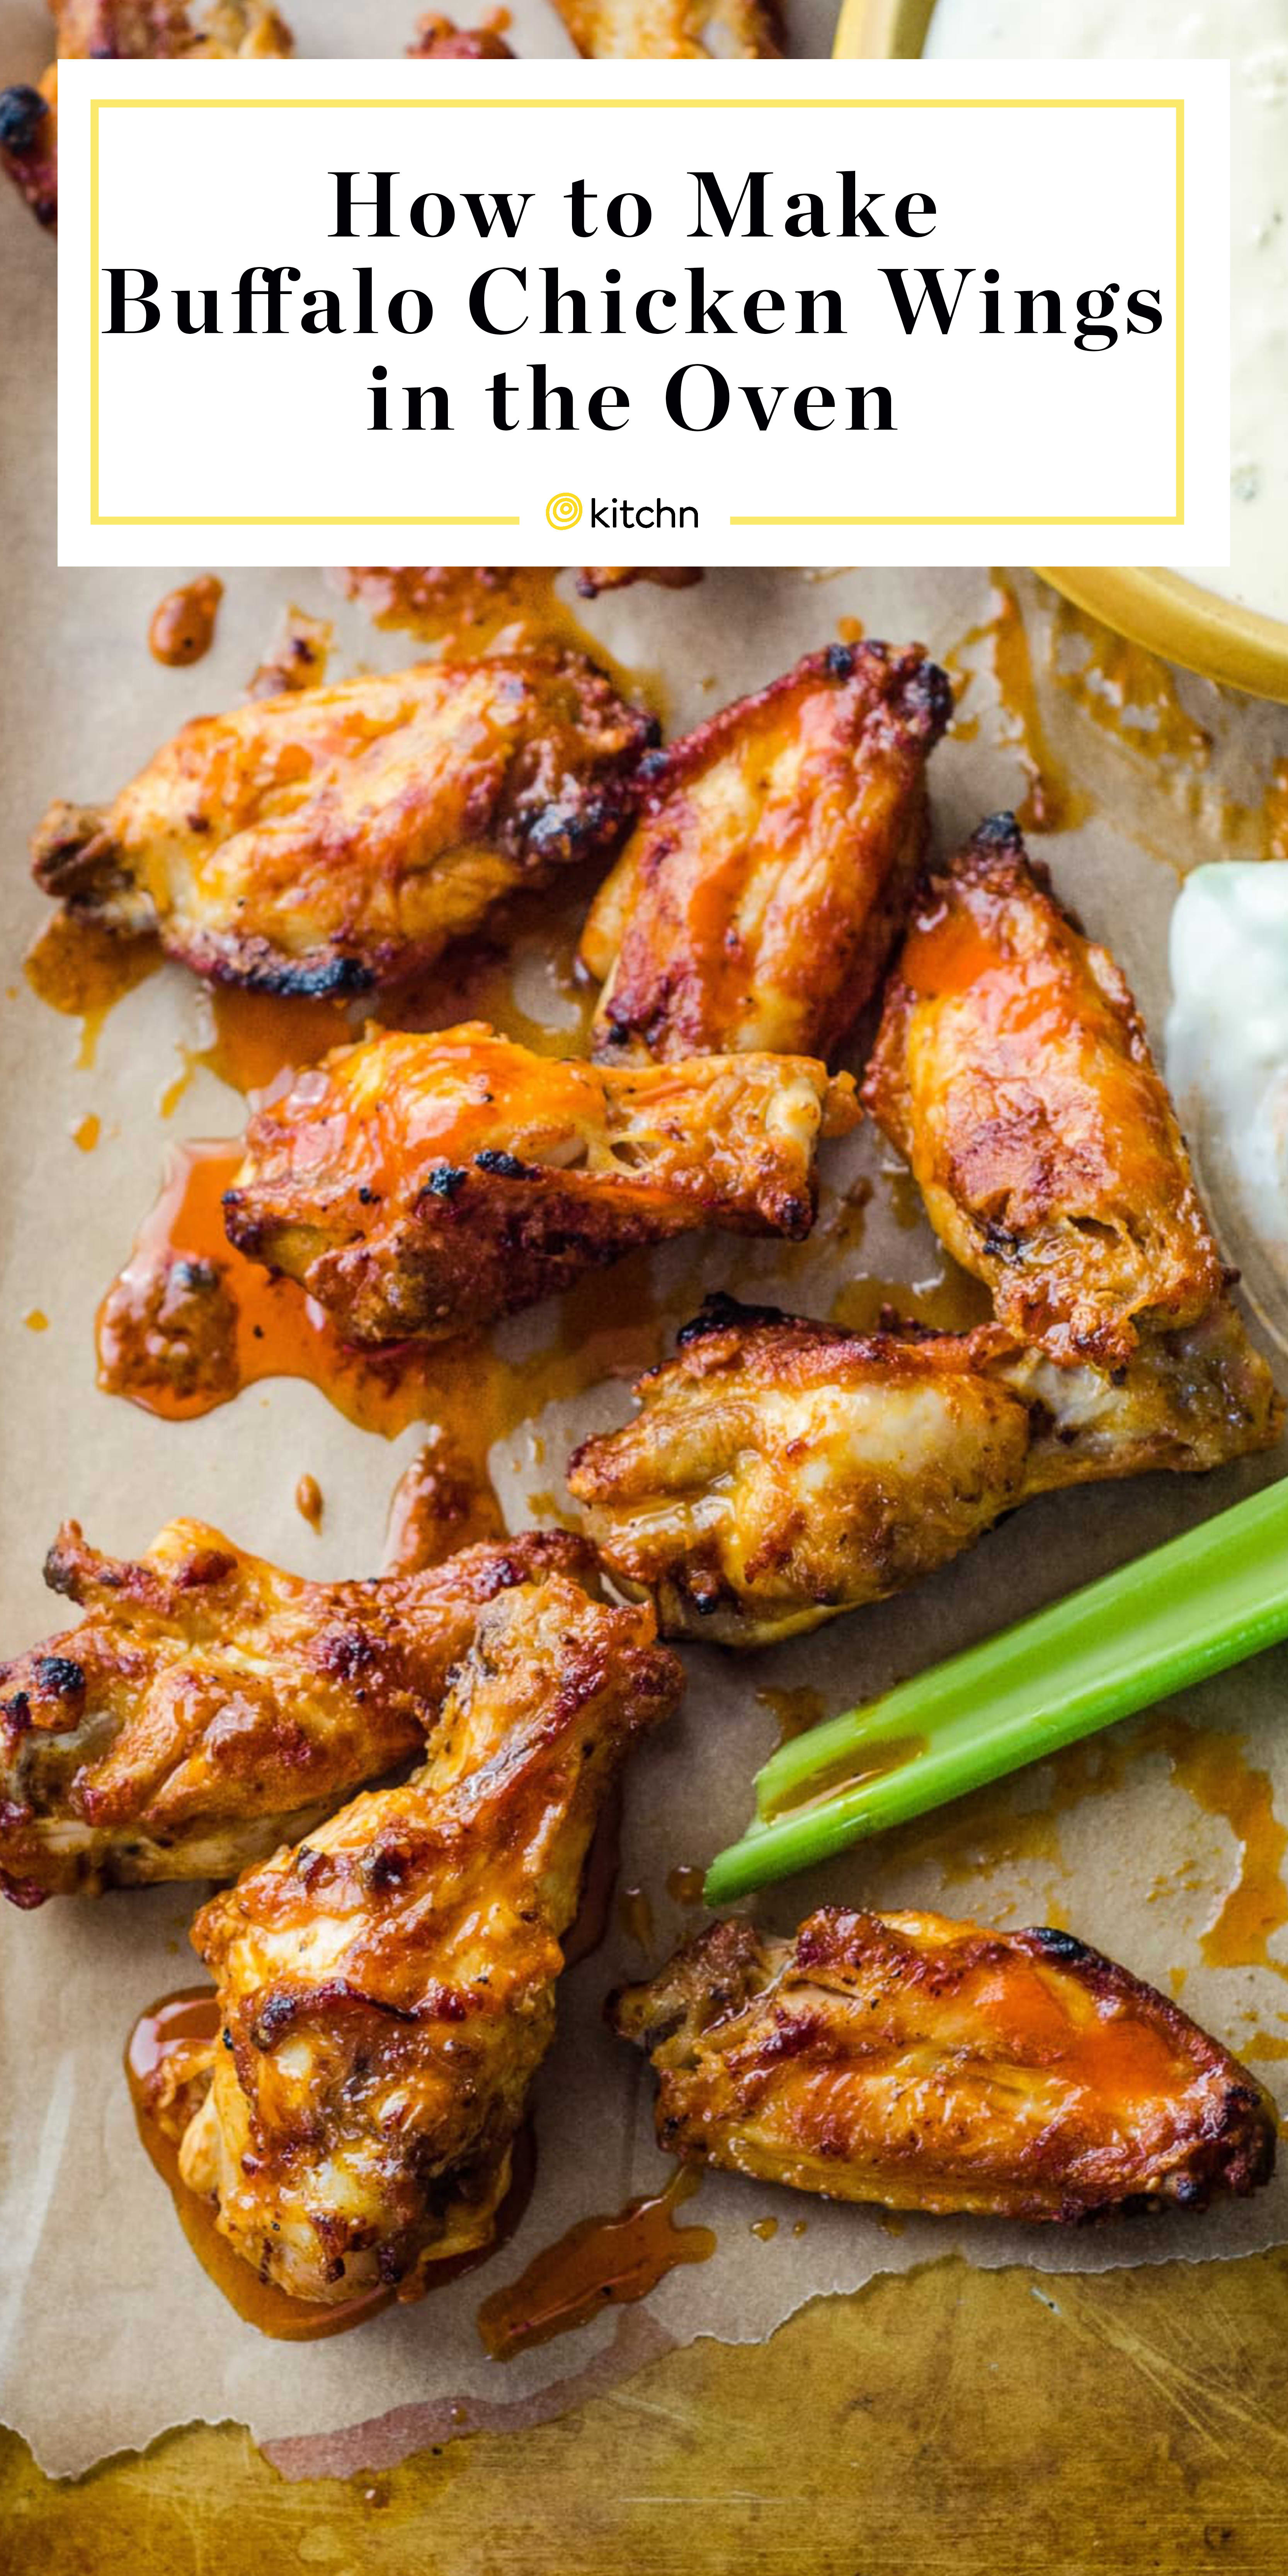 How To Make Buffalo Chicken Wings In The Oven Kitchn,How Long To Cook 1 Inch Pork Chops On A Gas Grill